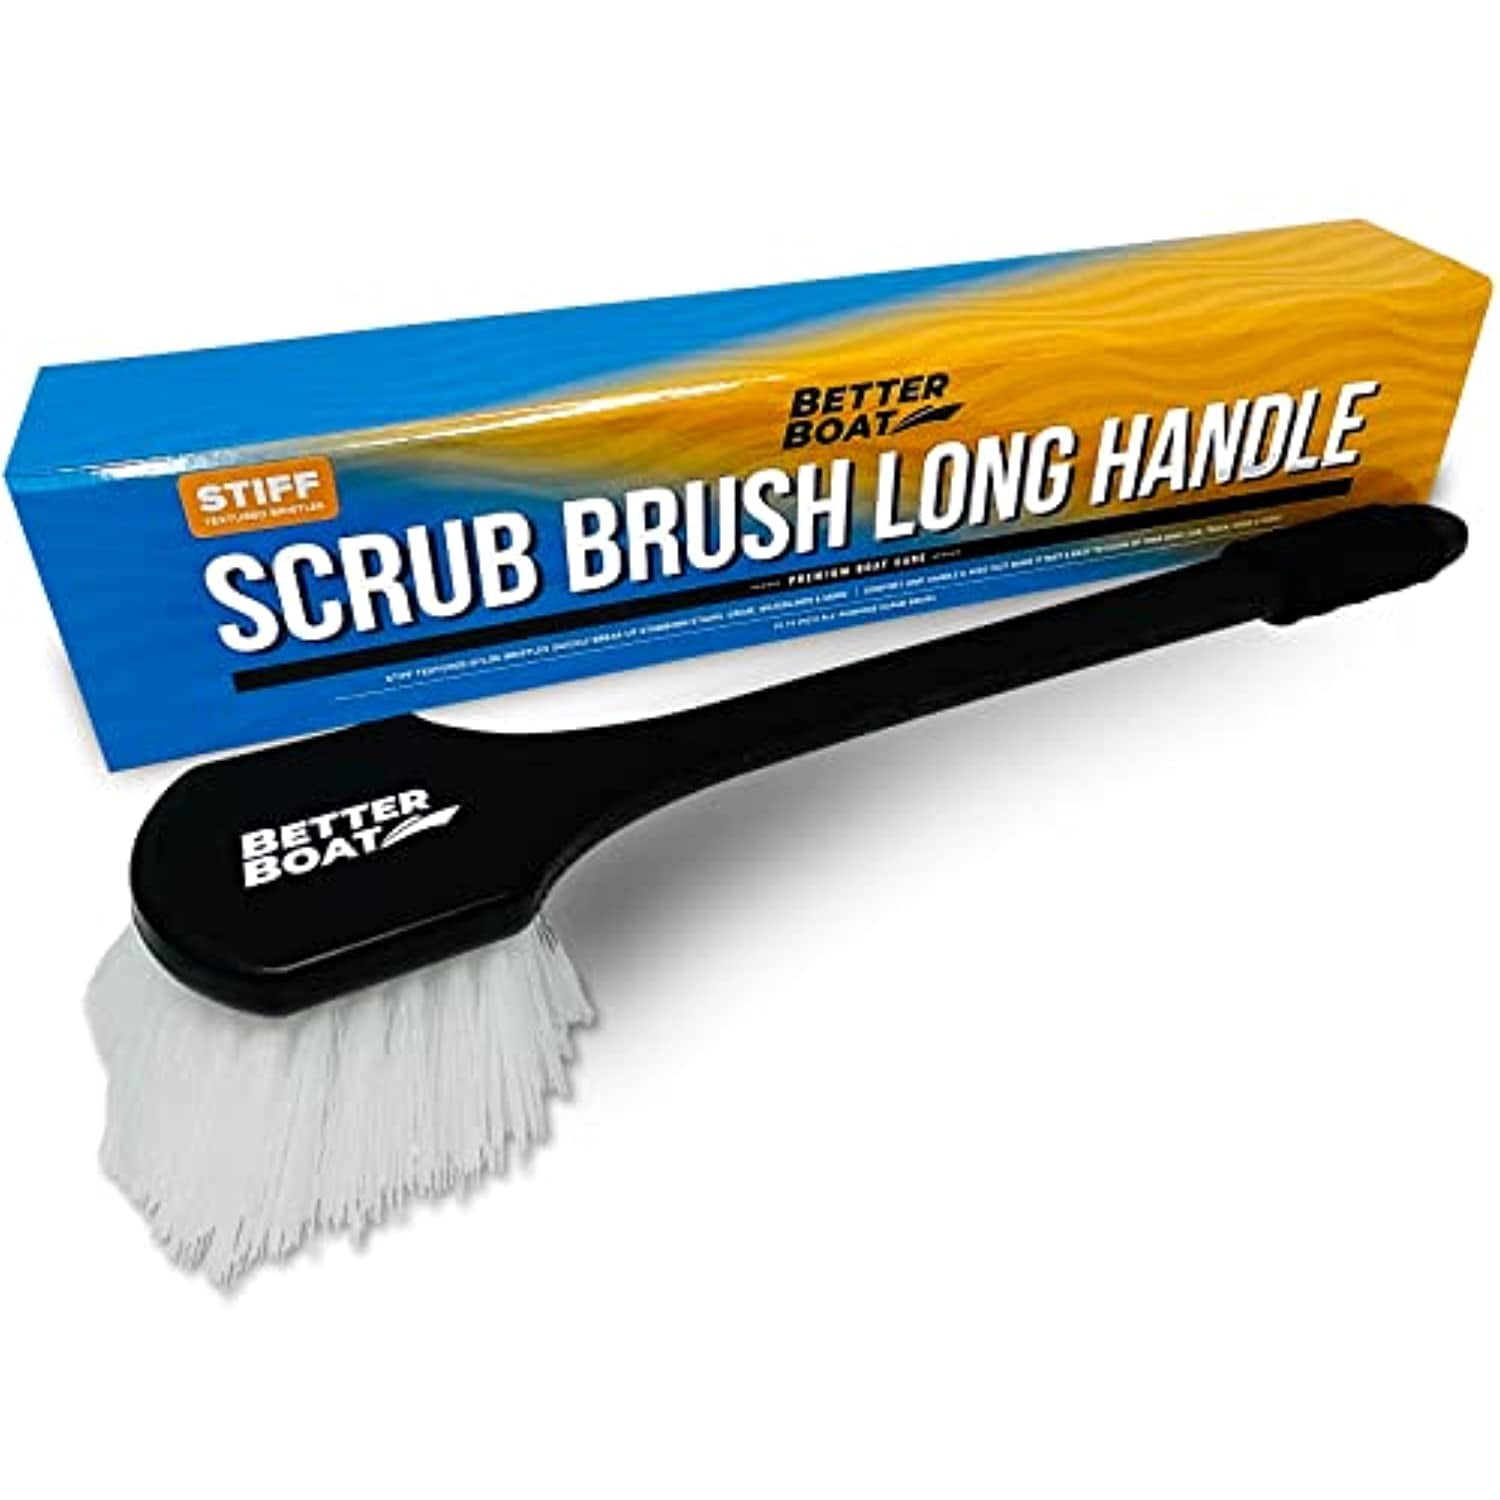 Wash Brushes & Squeegees – Nautical1